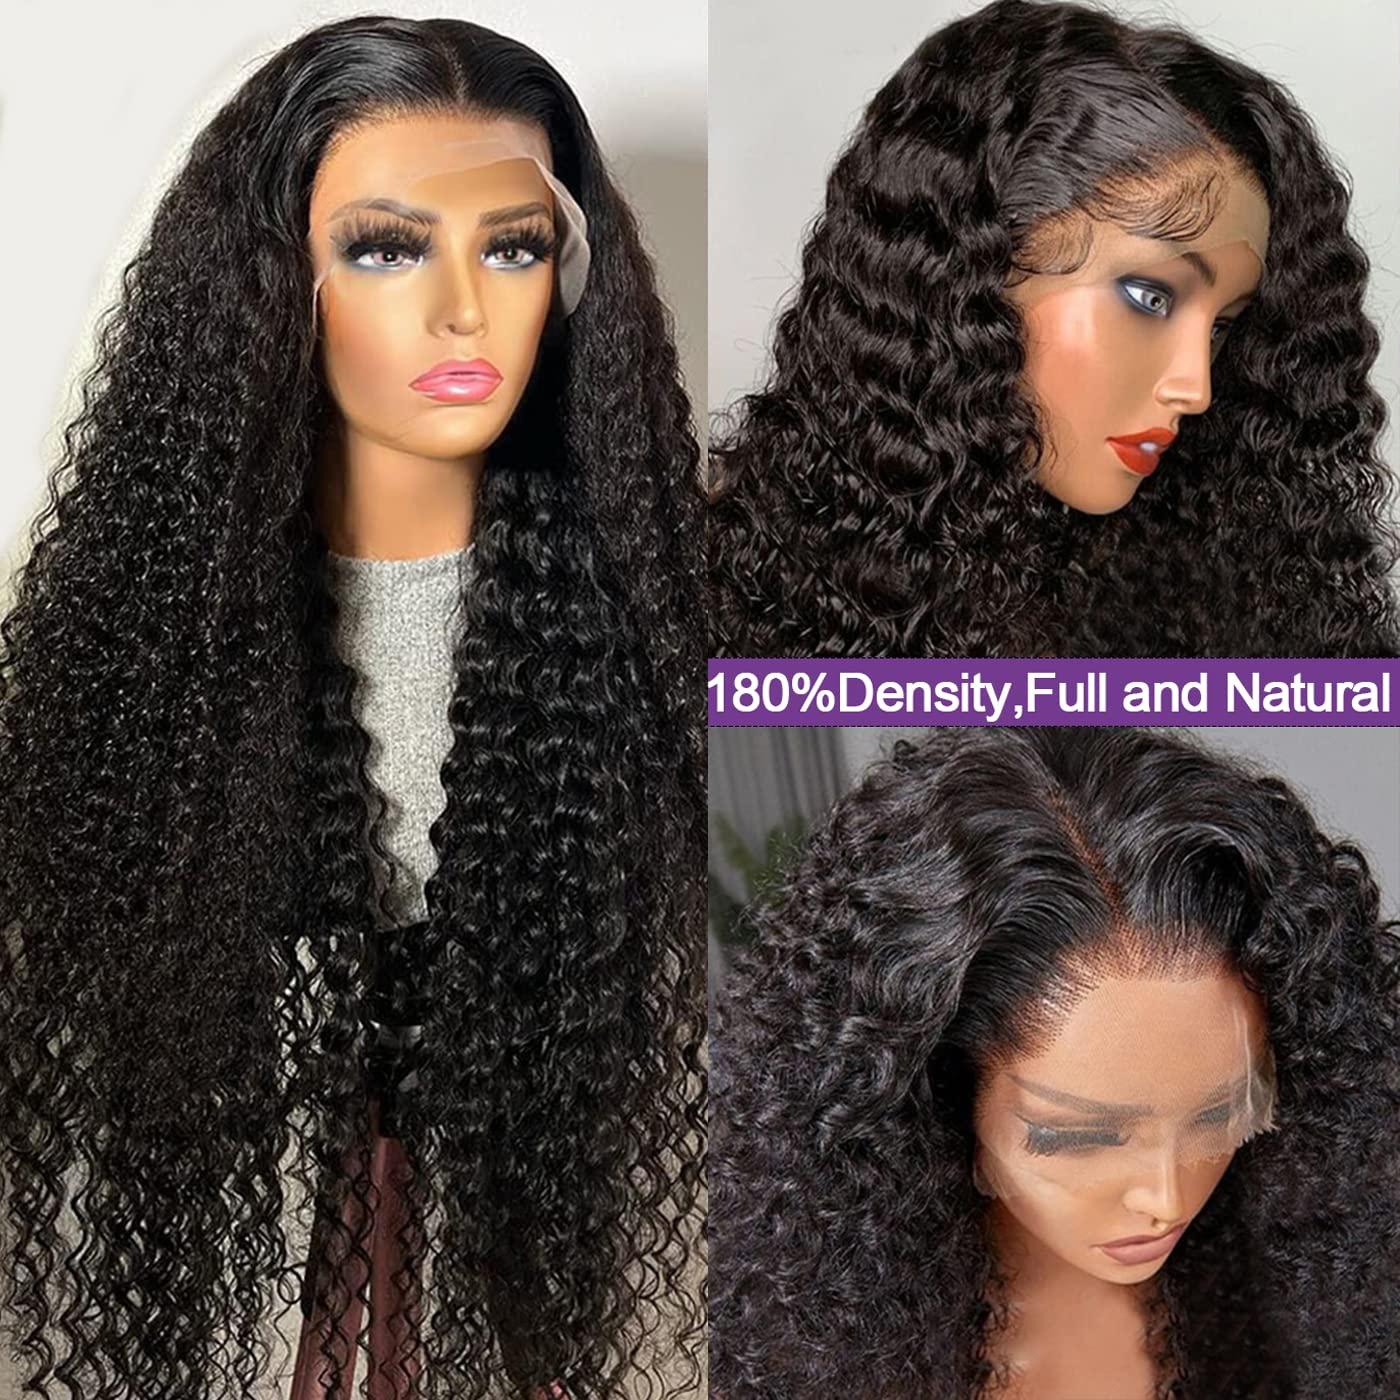 How to Style Deep Wave Wigs for Various Occasions?